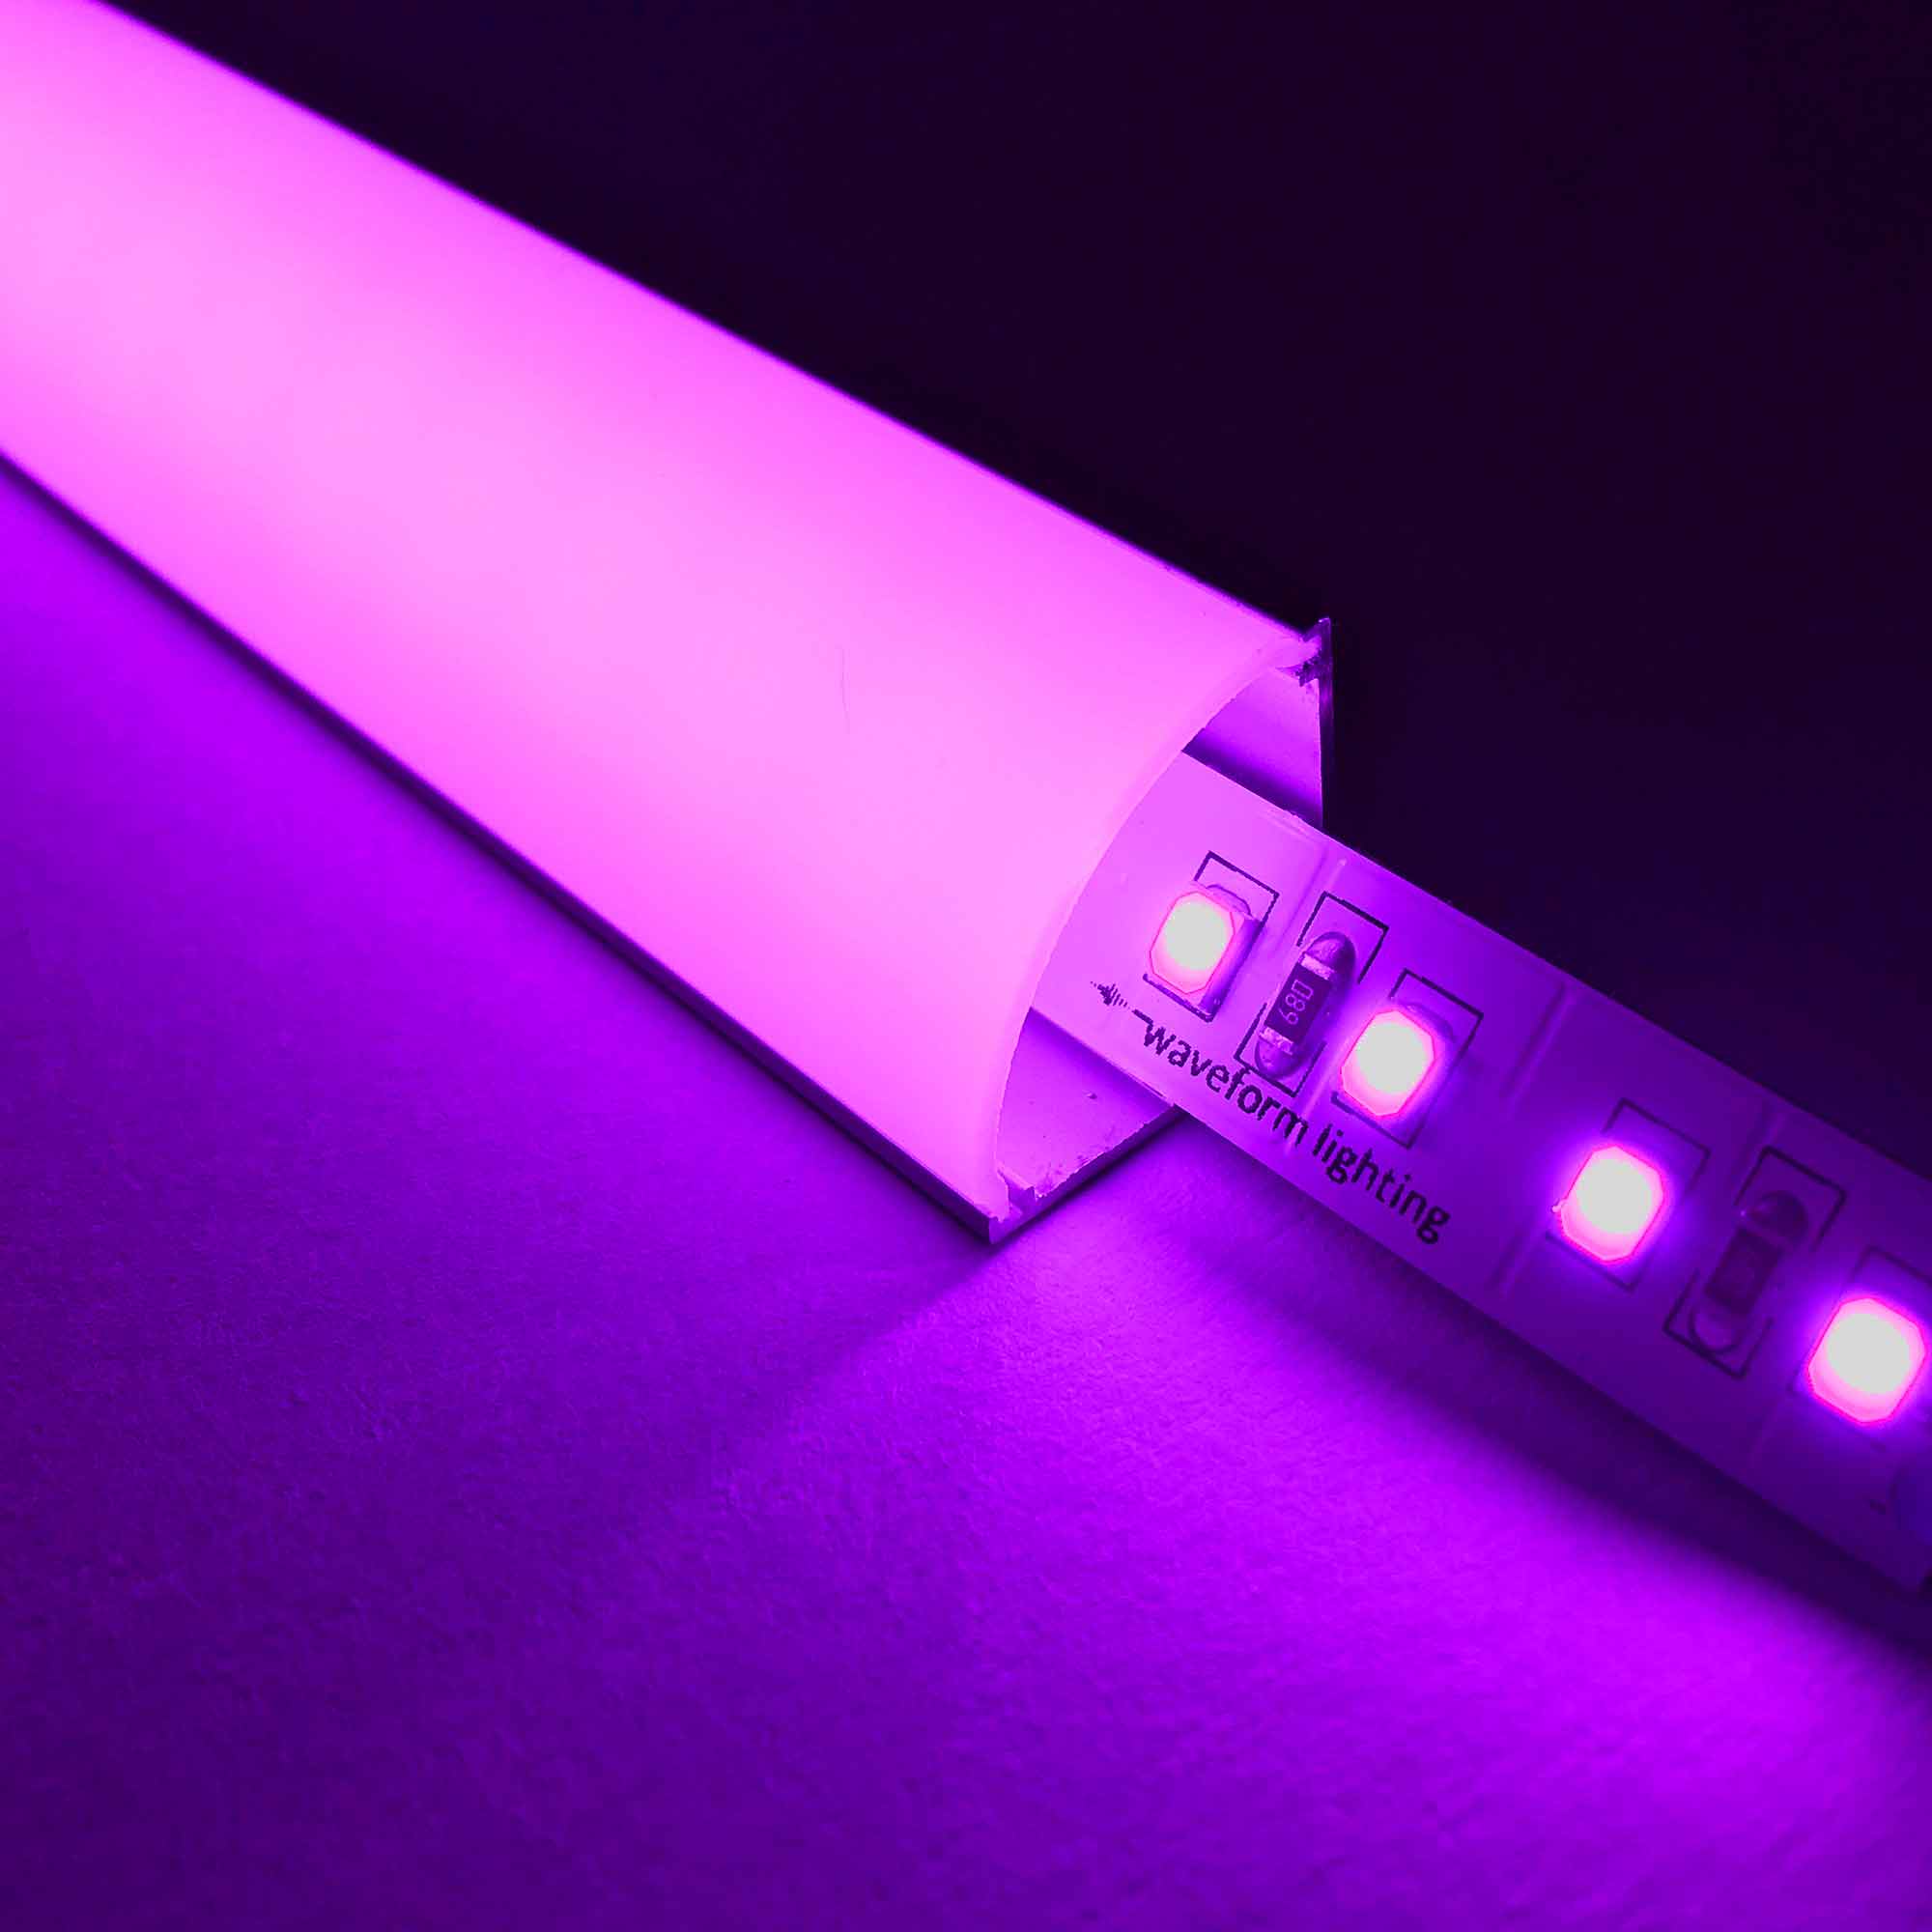 LED strip used in continuous lighting strip